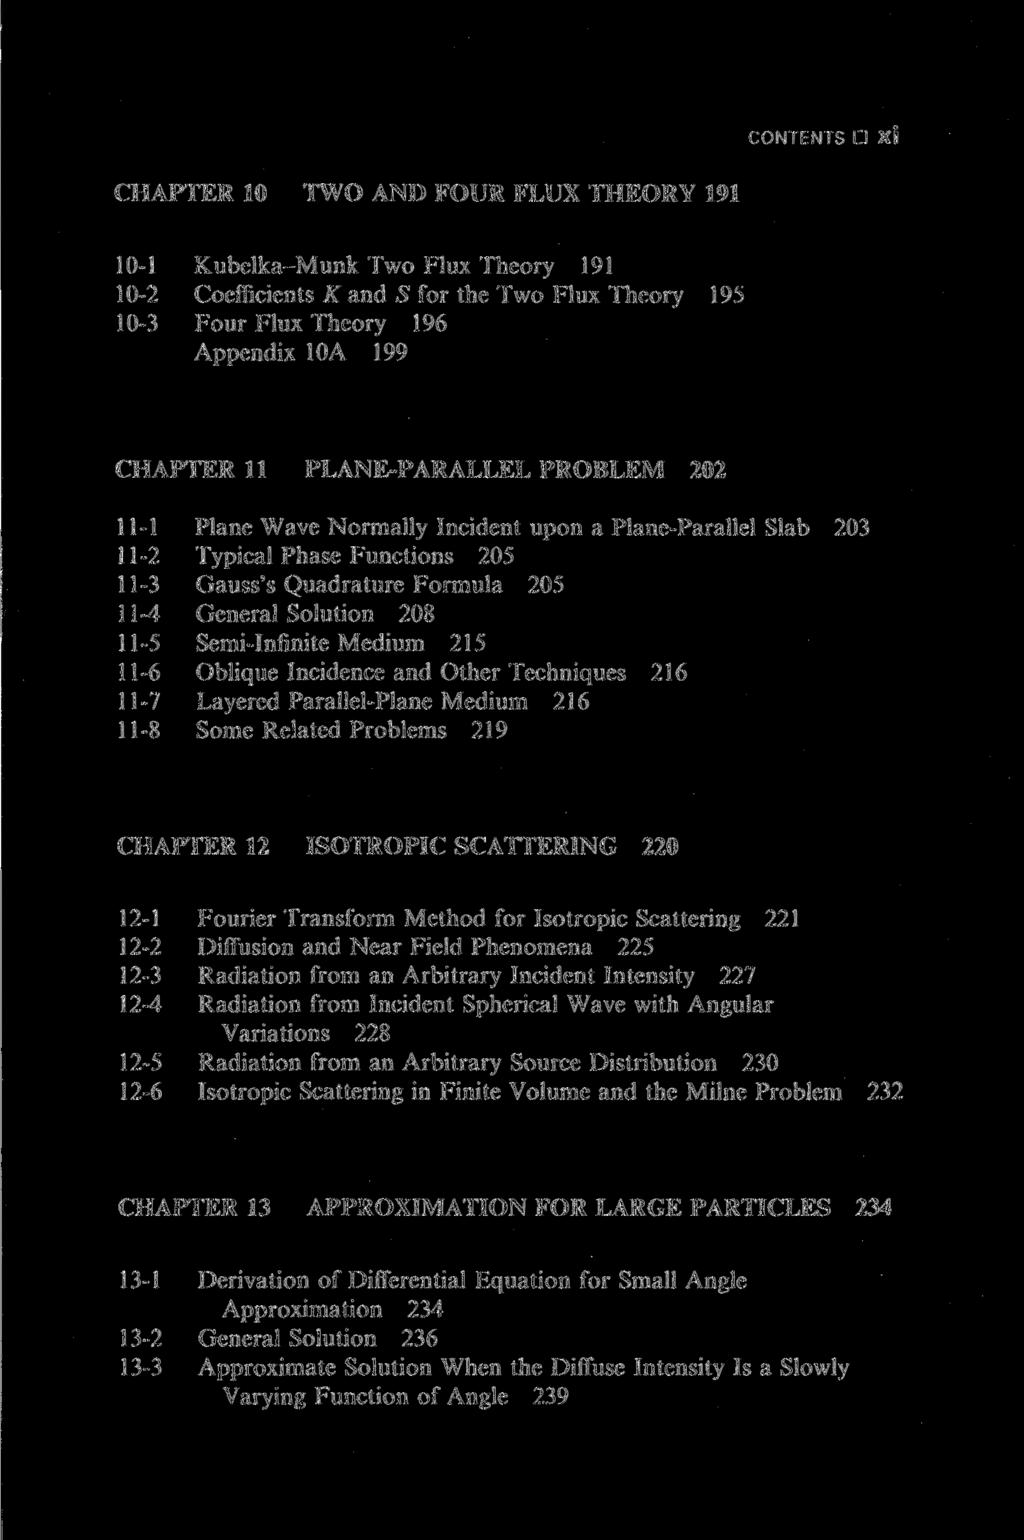 CONTENTS D XI CHAPTER 10 TWO AND FOUR FLUX THEORY 191 10-1 Kubelka-Munk Two Flux Theory 191 10-2 Coefficients К and S for the Two Flux Theory 195 10-3 Four Flux Theory 196 Appendix 10A 199 CHAPTER 11